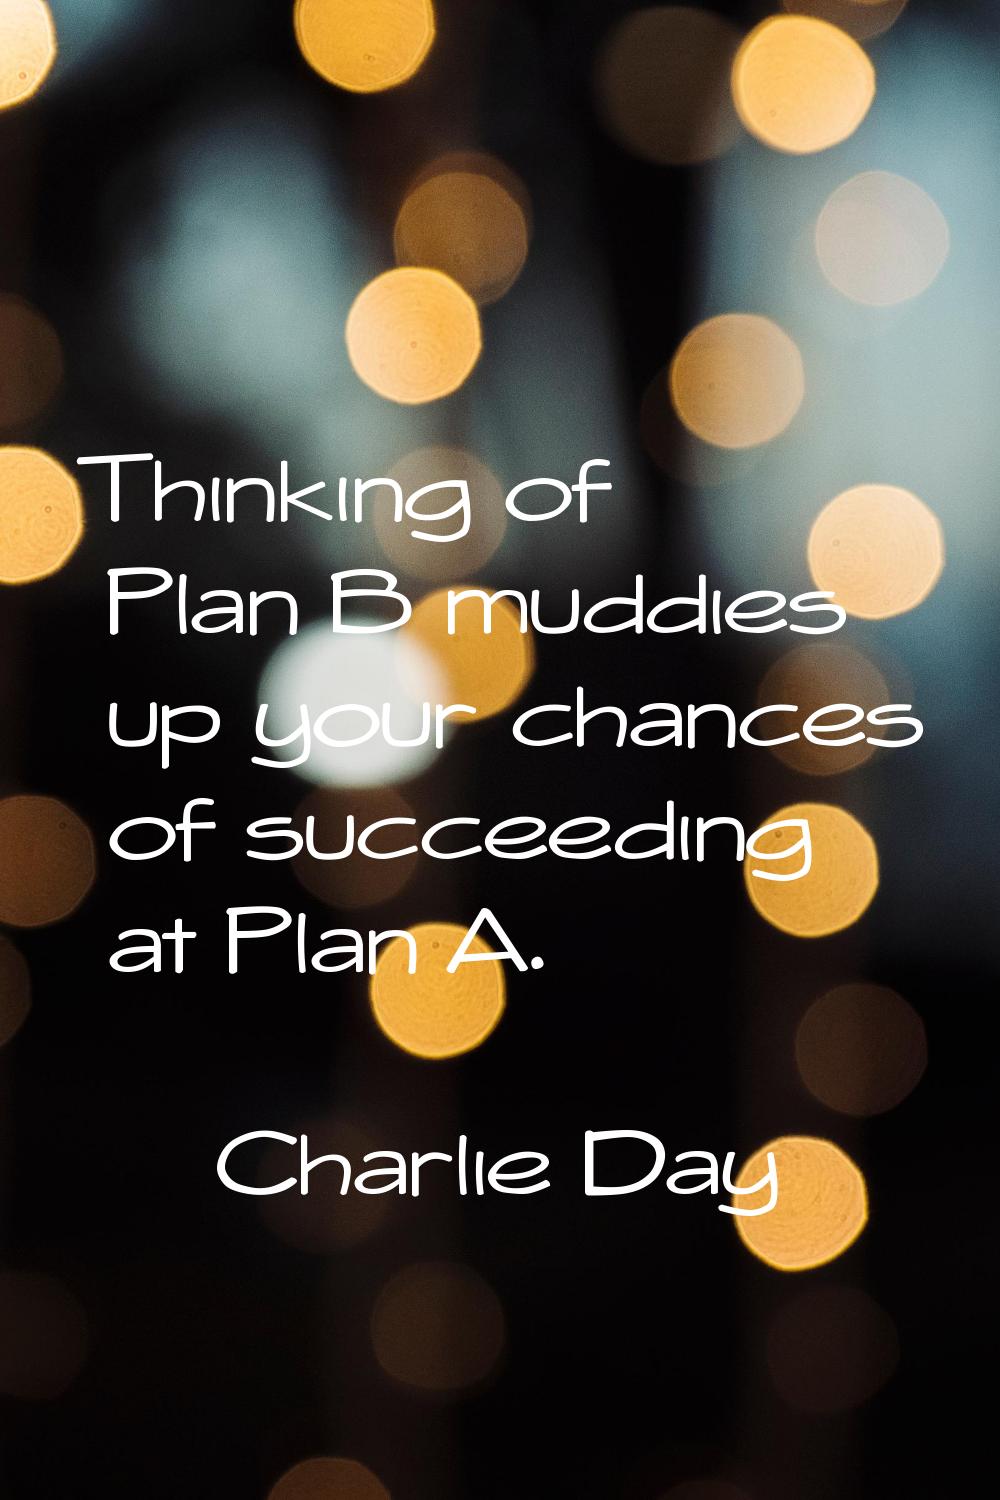 Thinking of Plan B muddies up your chances of succeeding at Plan A.